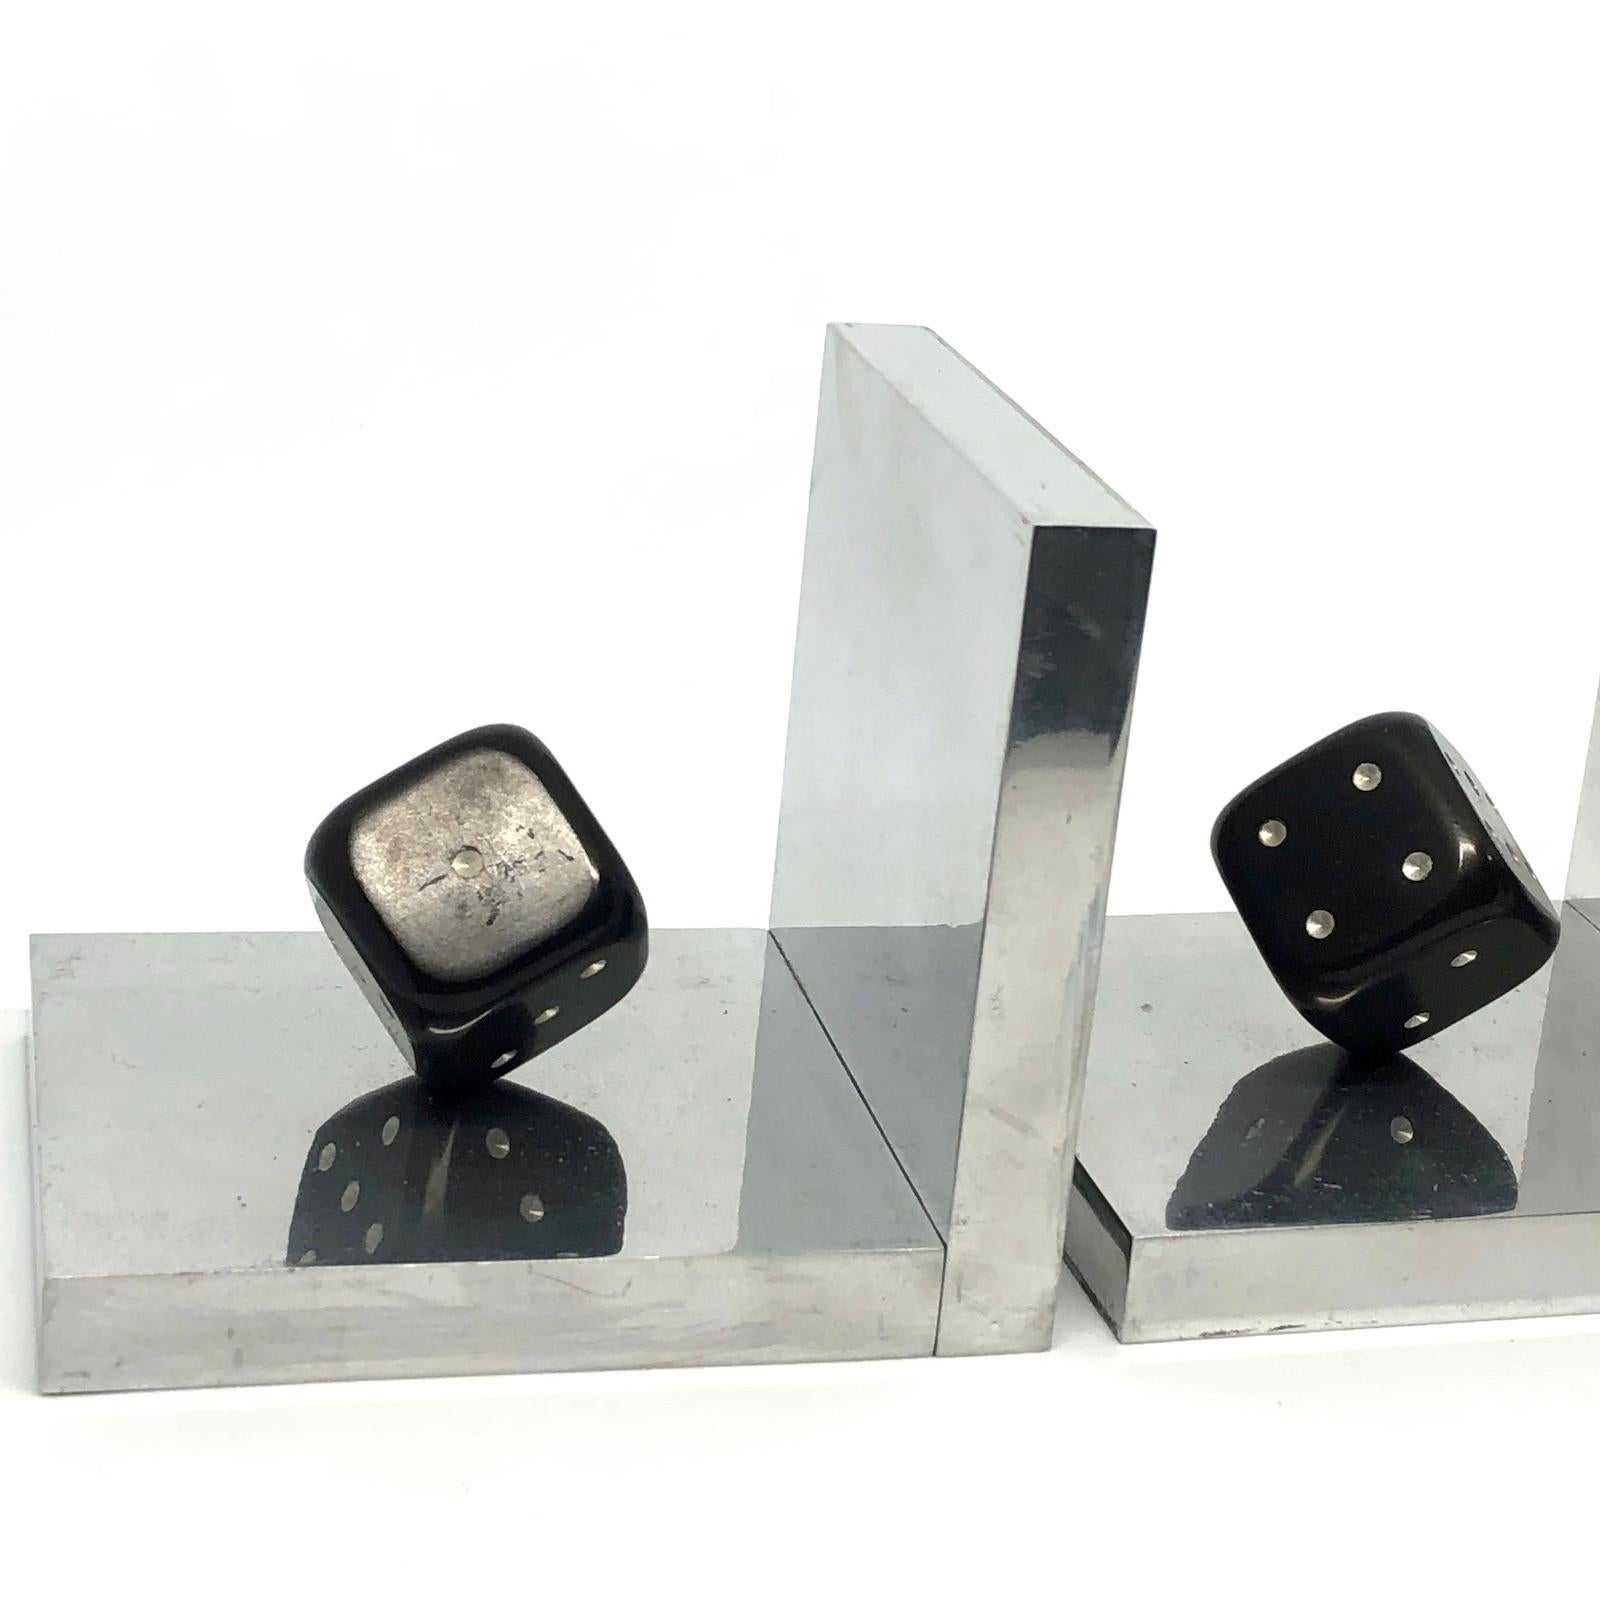 Pair of Art Deco Dice Bookends Black and Chrome Vintage German 1